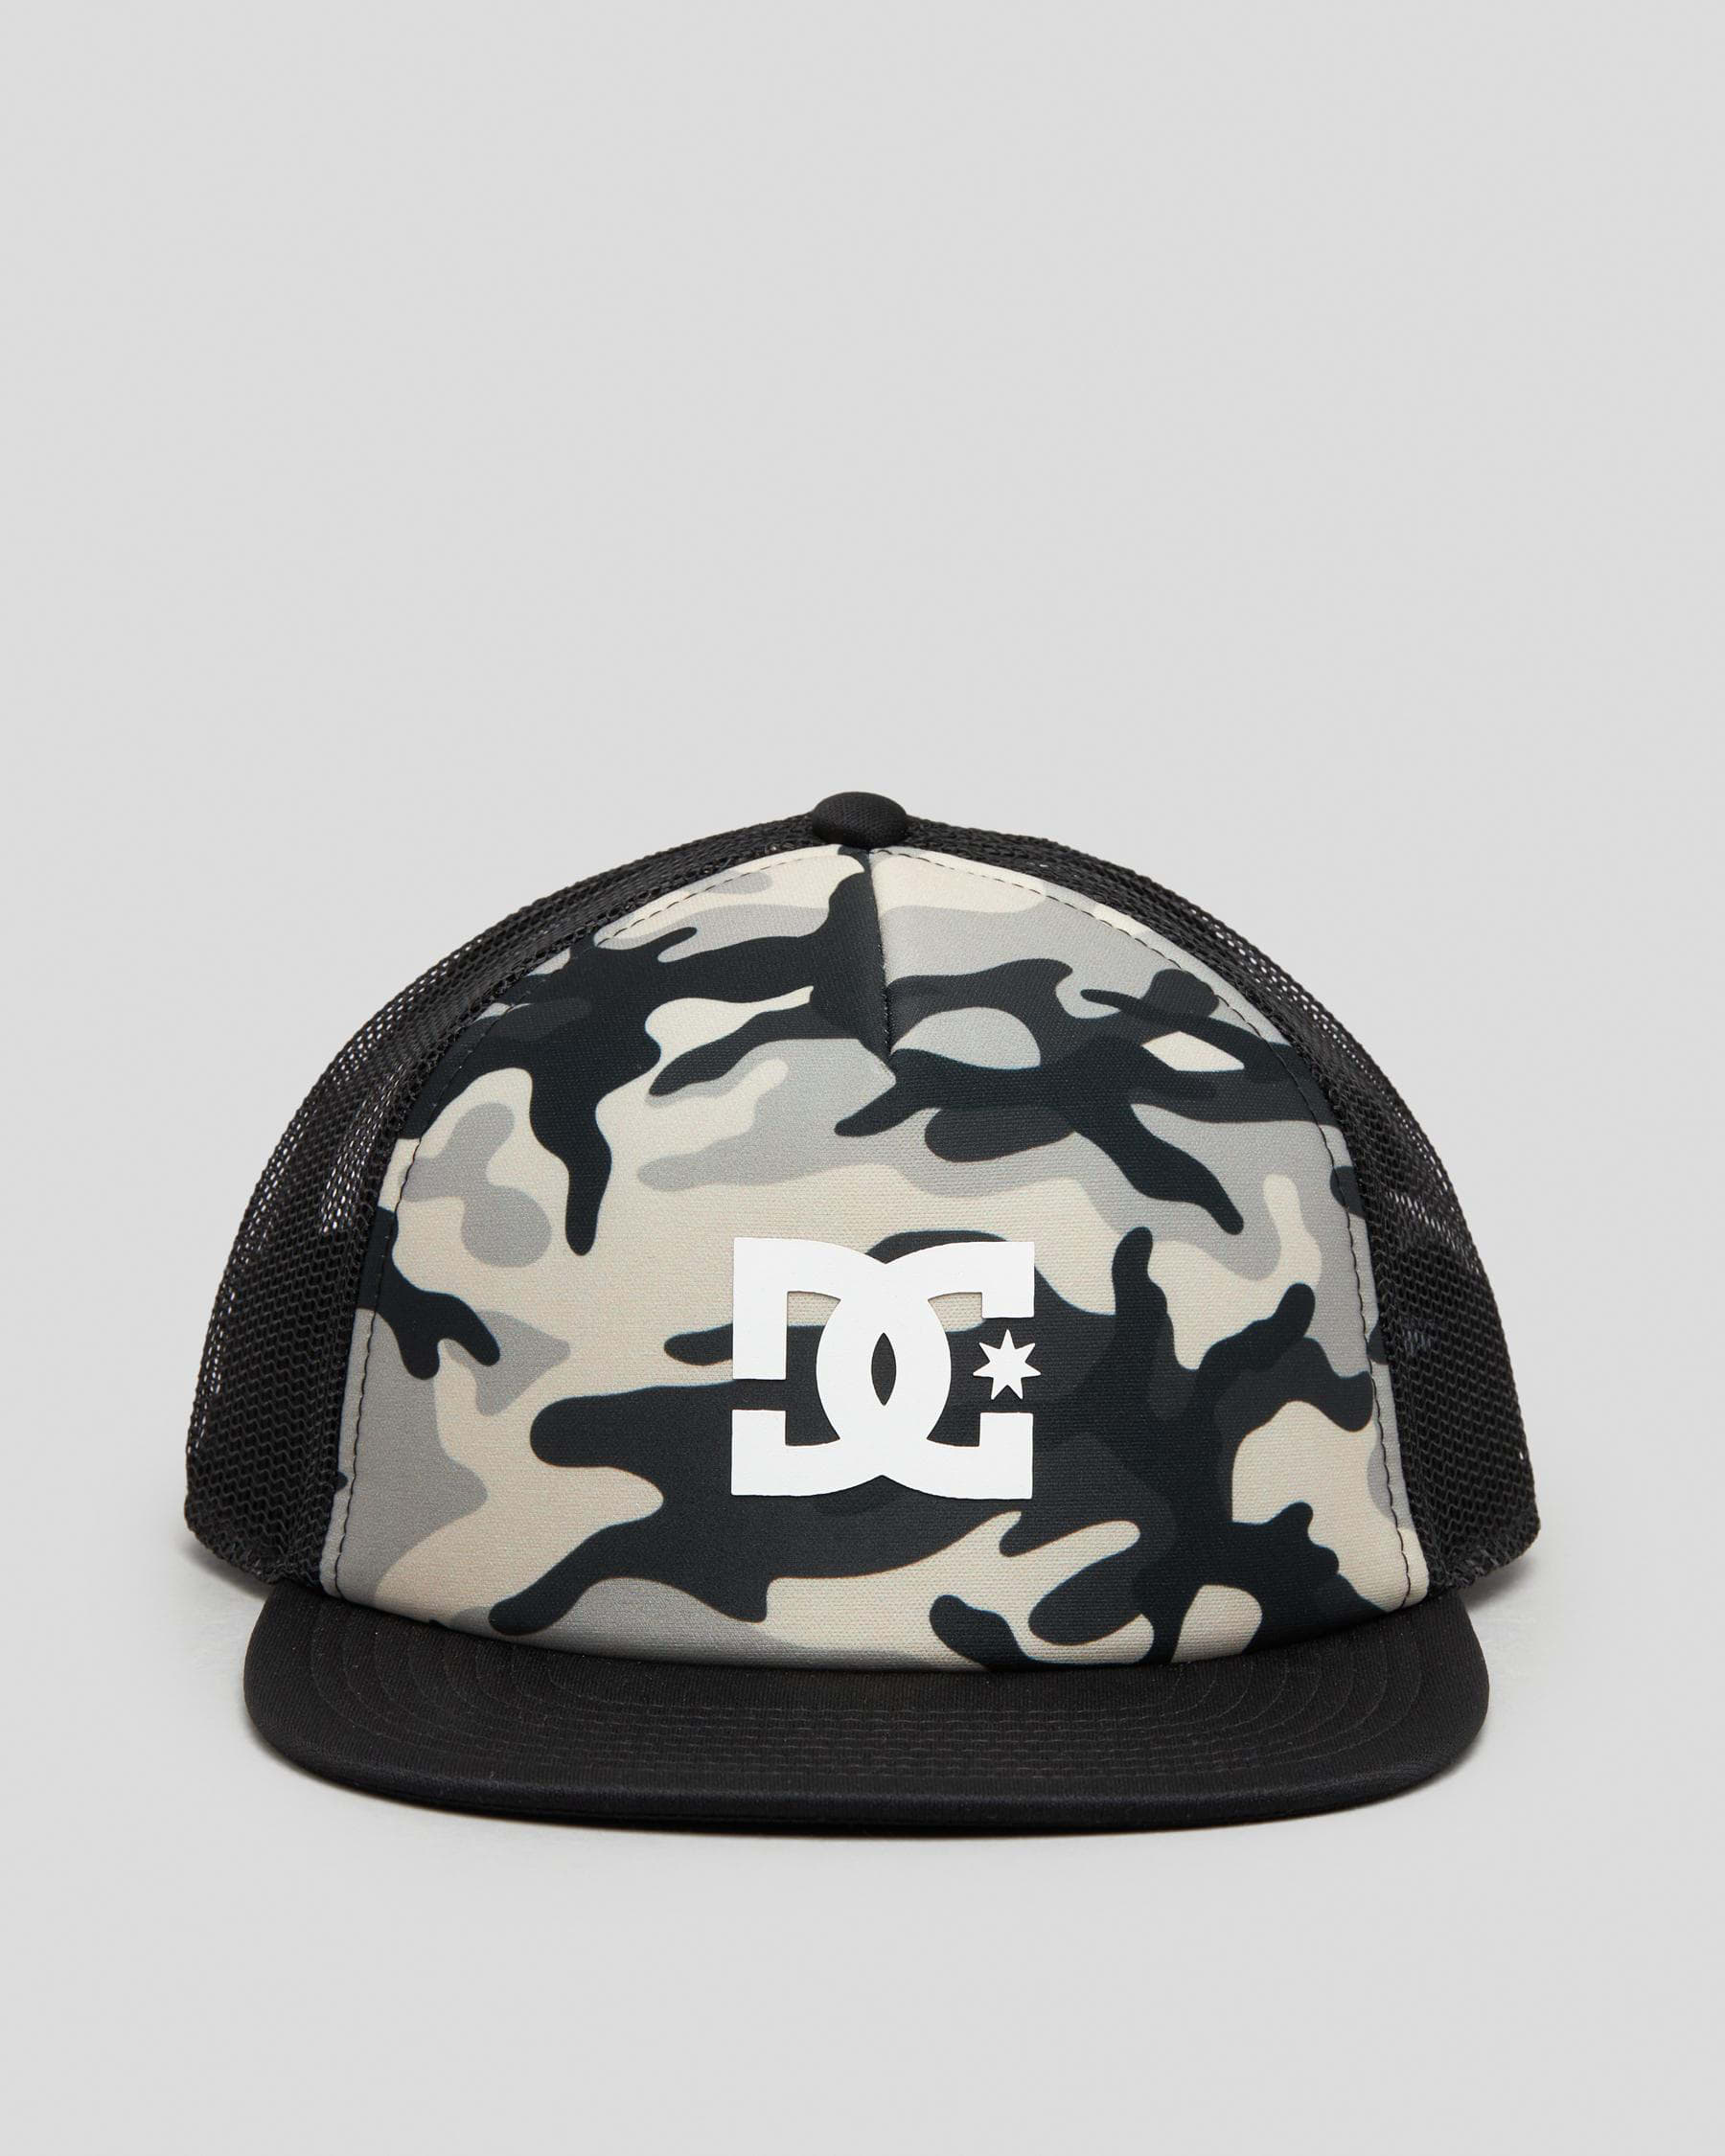 Easy Camo - FREE* Shipping - States Gas Station Boys\' DC Beach Cap United & Shoes In City Returns Trucker Stone